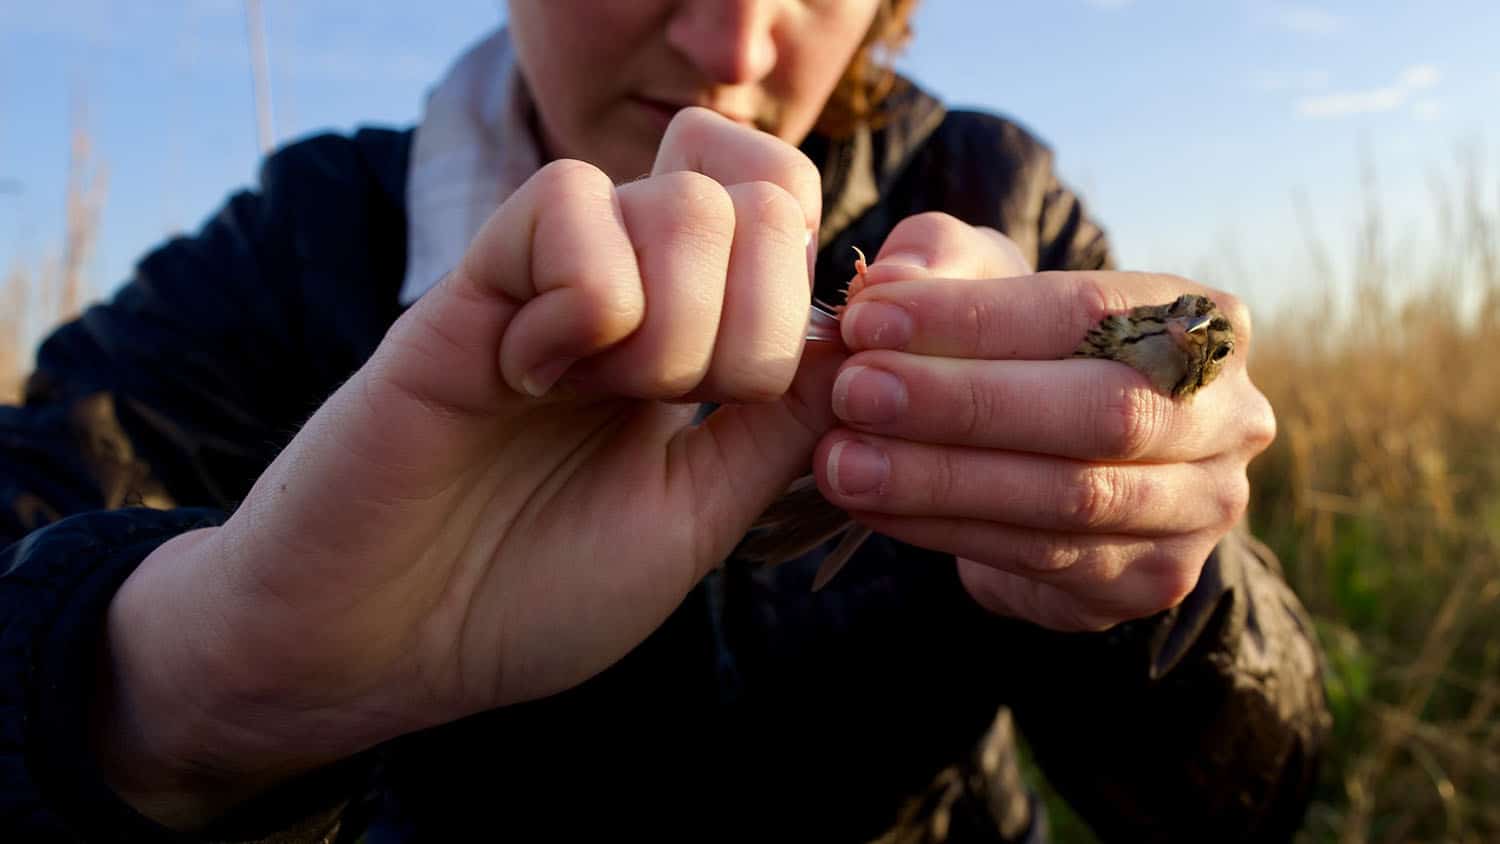 a woman holds a small bird in one hand while attaching a band to its leg with her other hand